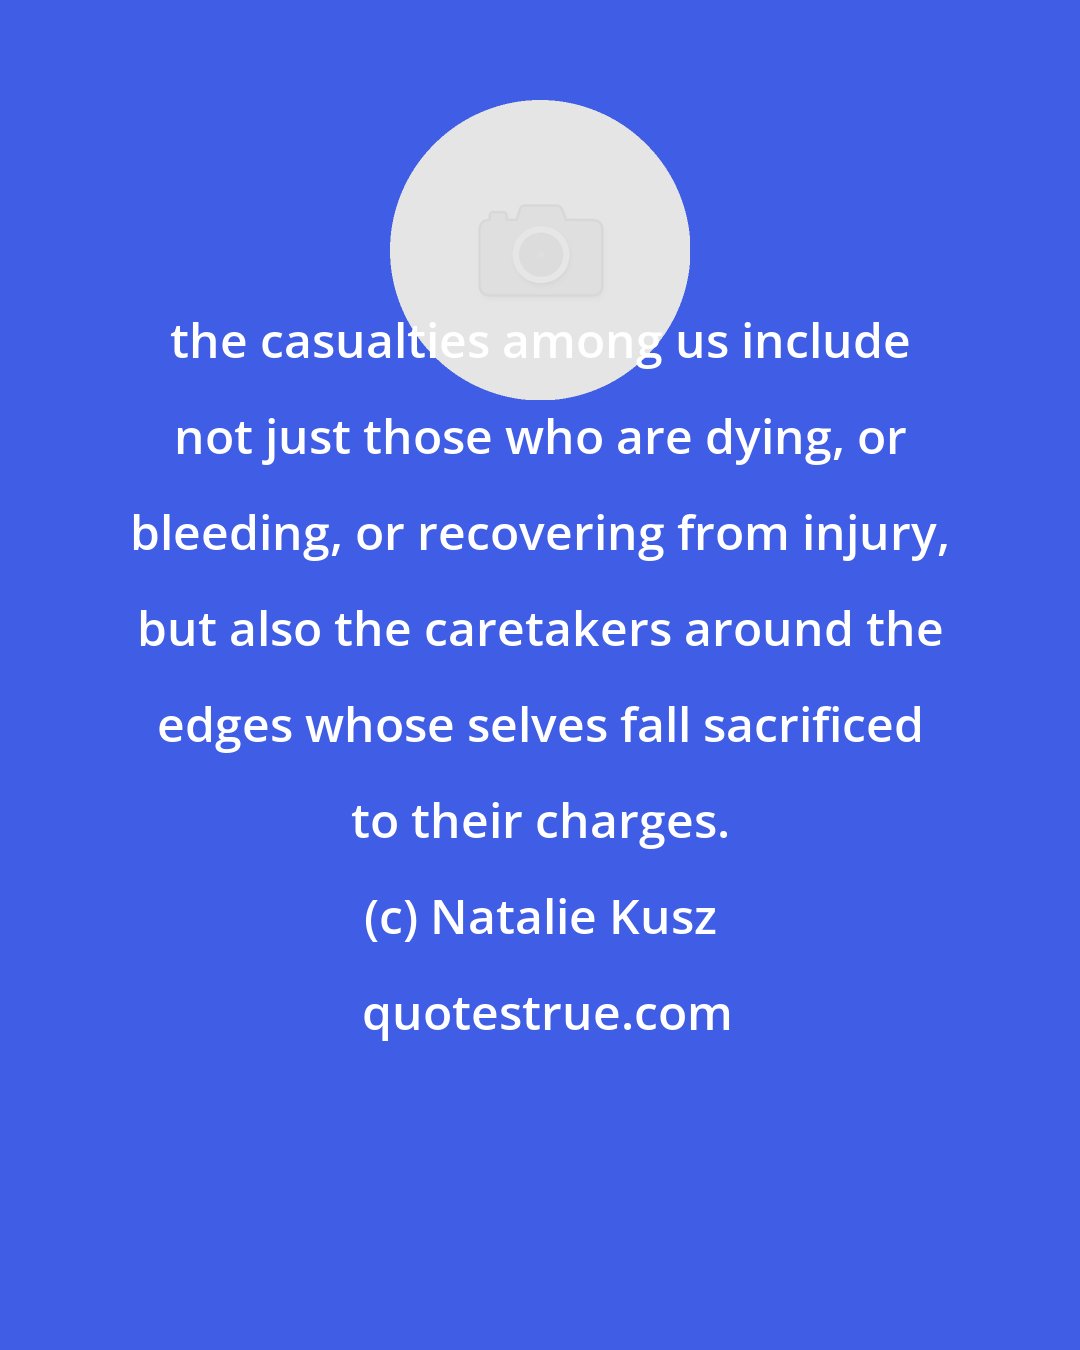 Natalie Kusz: the casualties among us include not just those who are dying, or bleeding, or recovering from injury, but also the caretakers around the edges whose selves fall sacrificed to their charges.